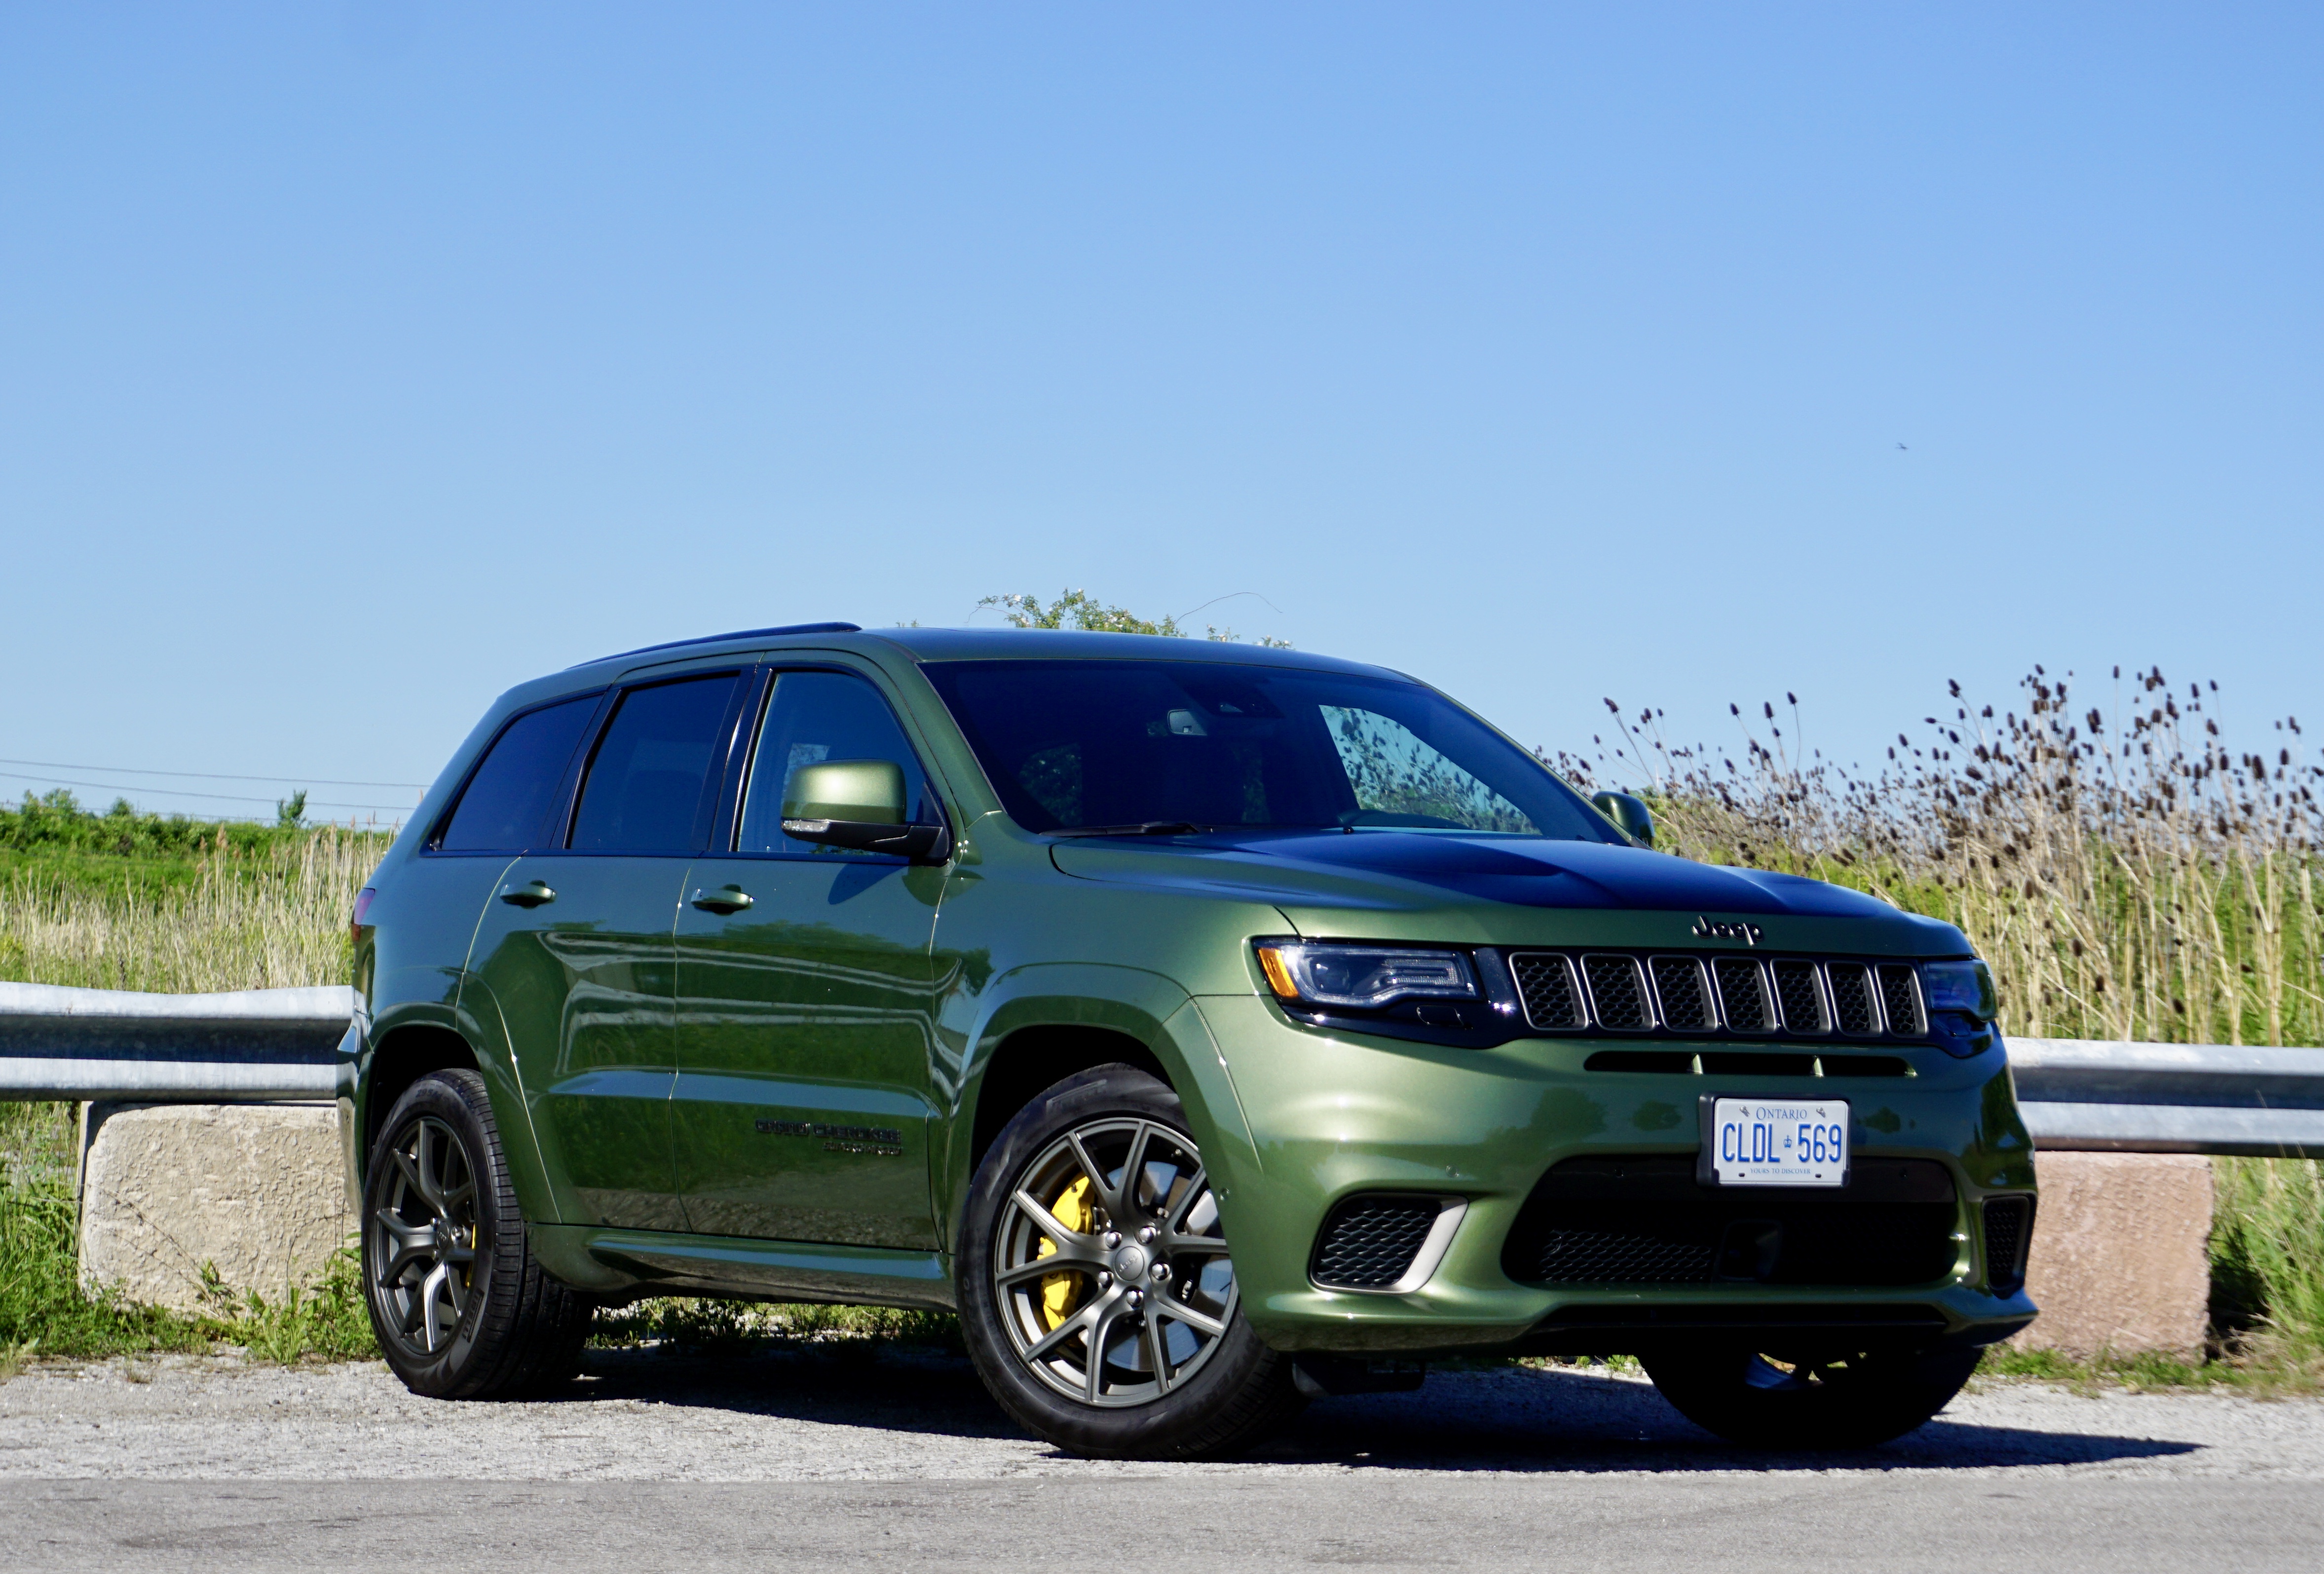 2019 Jeep Trackhawk Review: The Big Payback